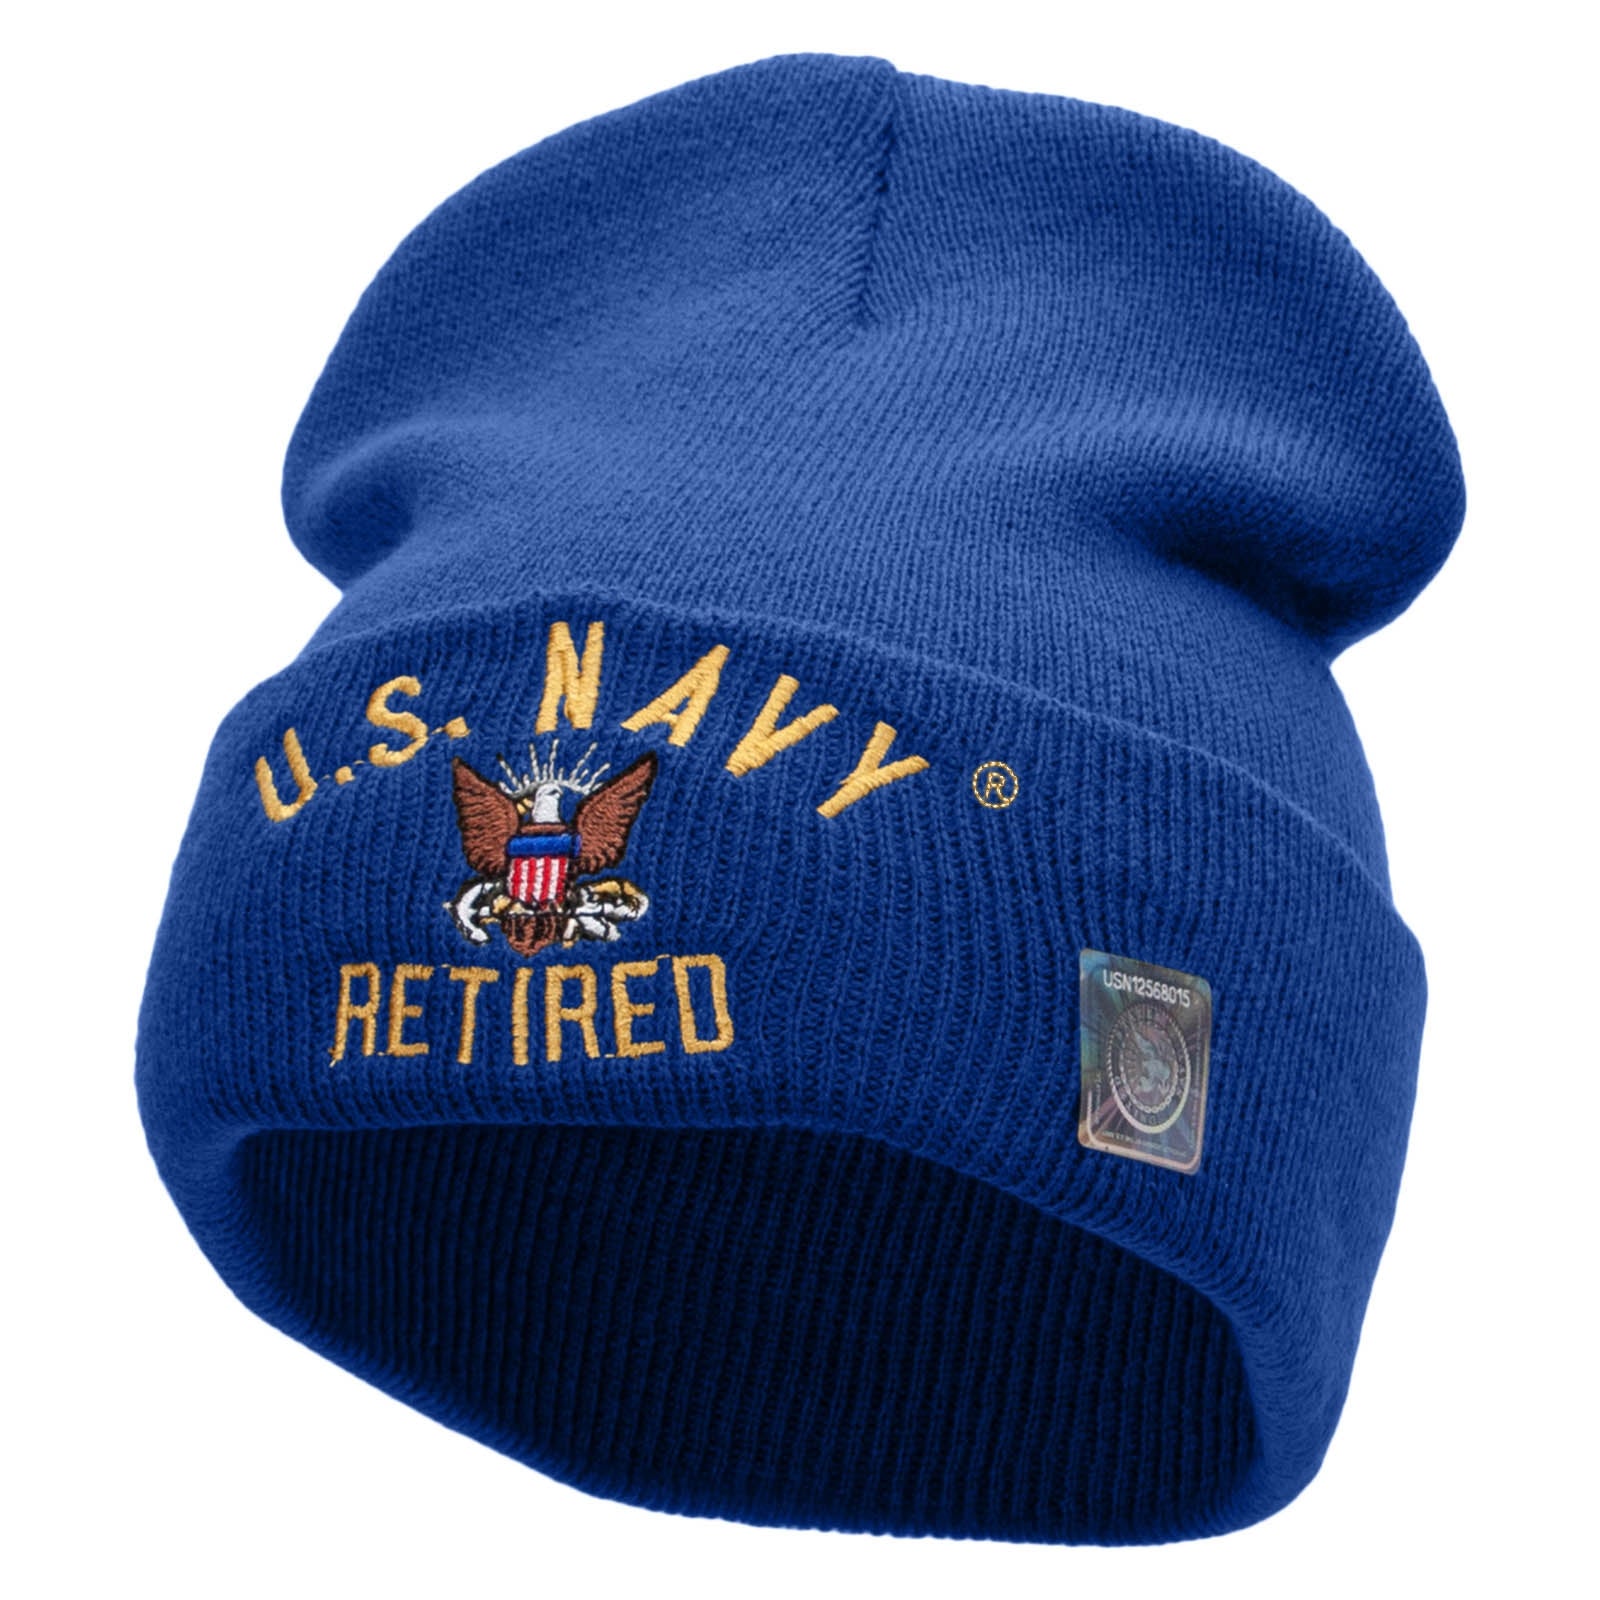 Licensed US Navy Retired Military Embroidered Long Beanie Made in USA - Royal OSFM